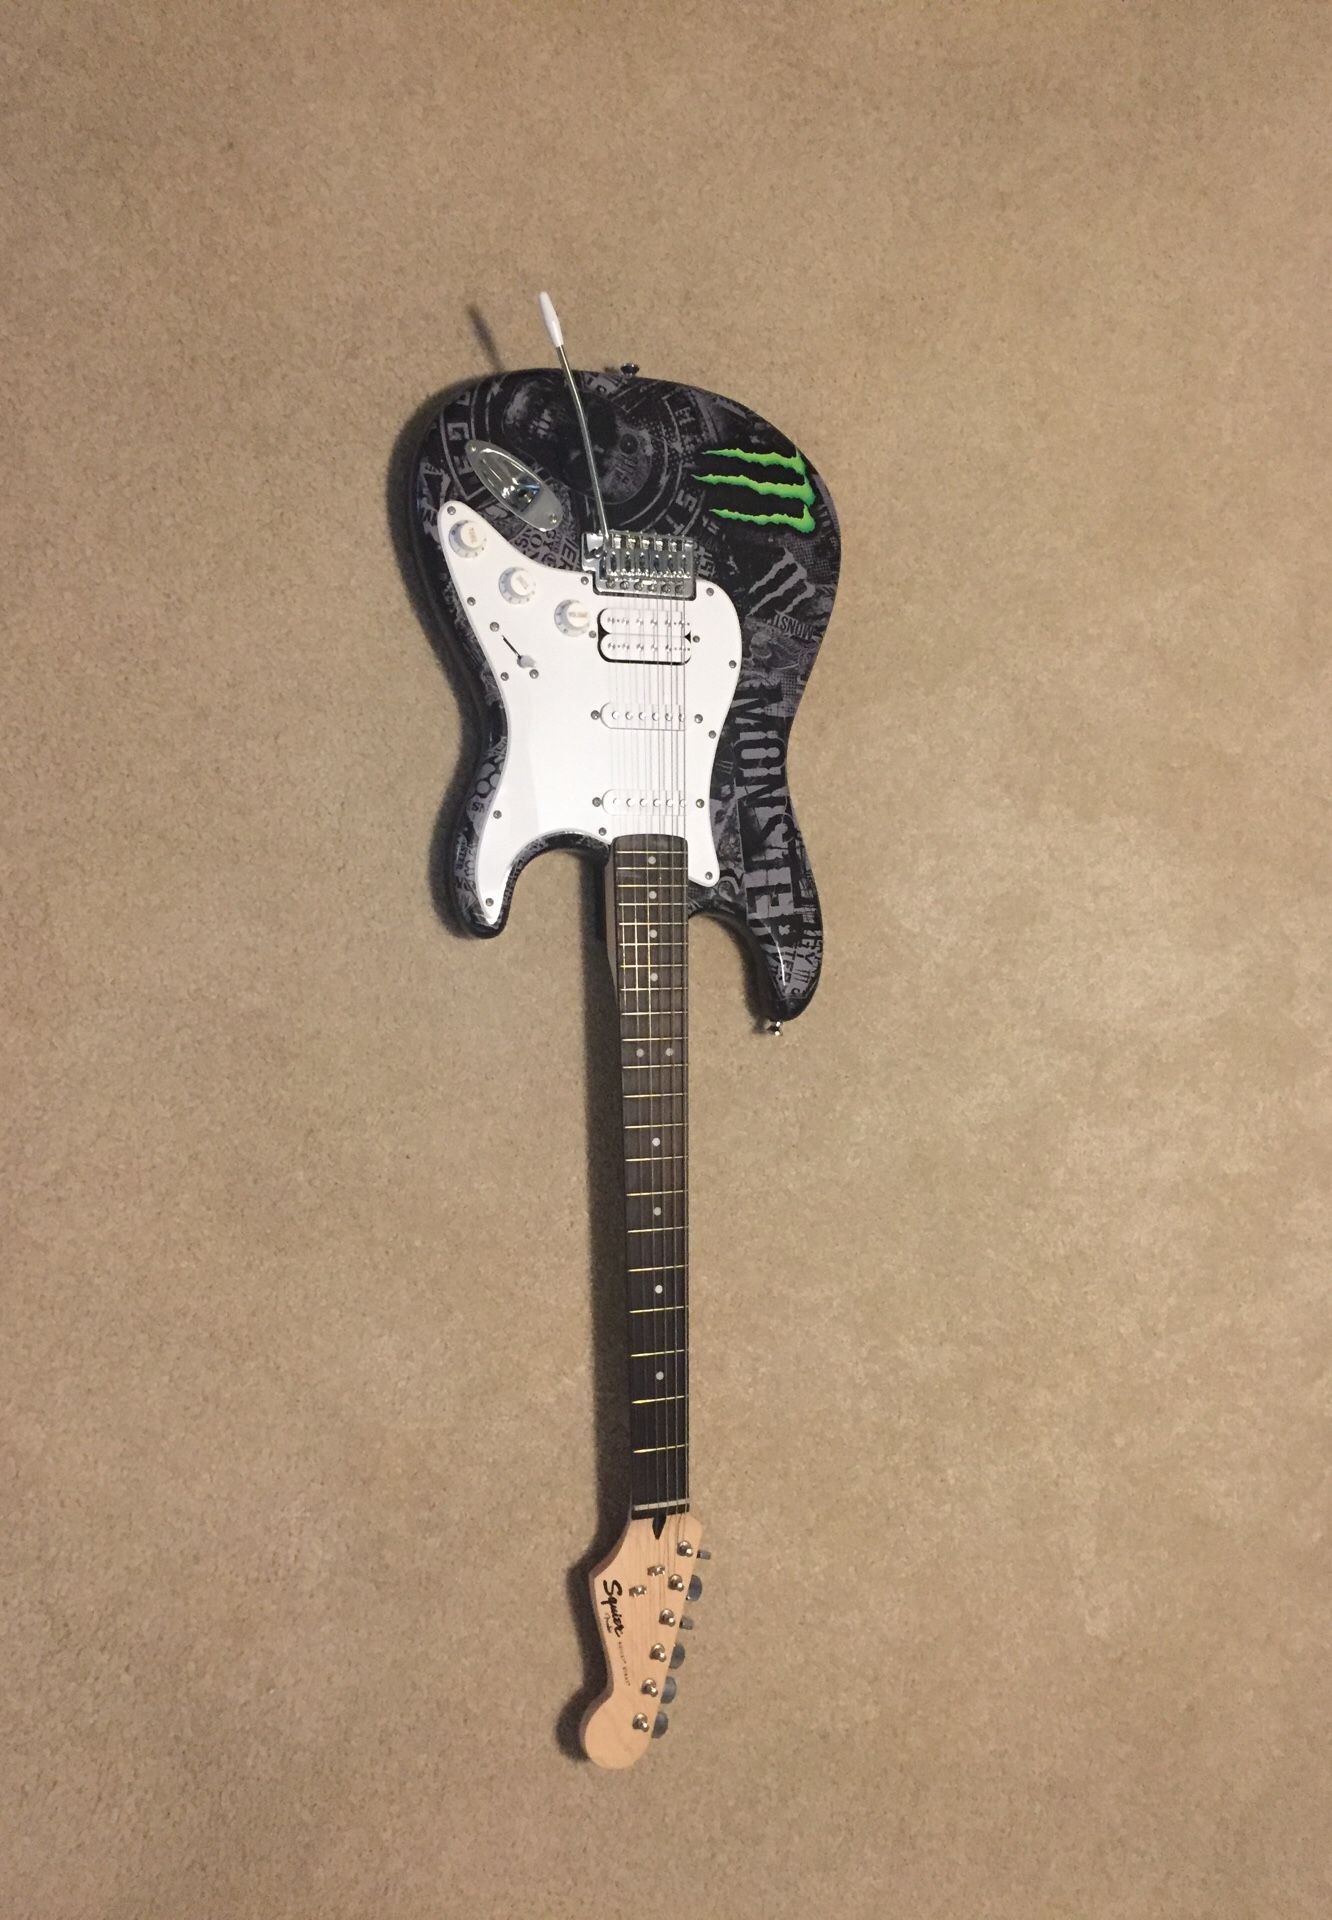 Squier by fender electric guitar